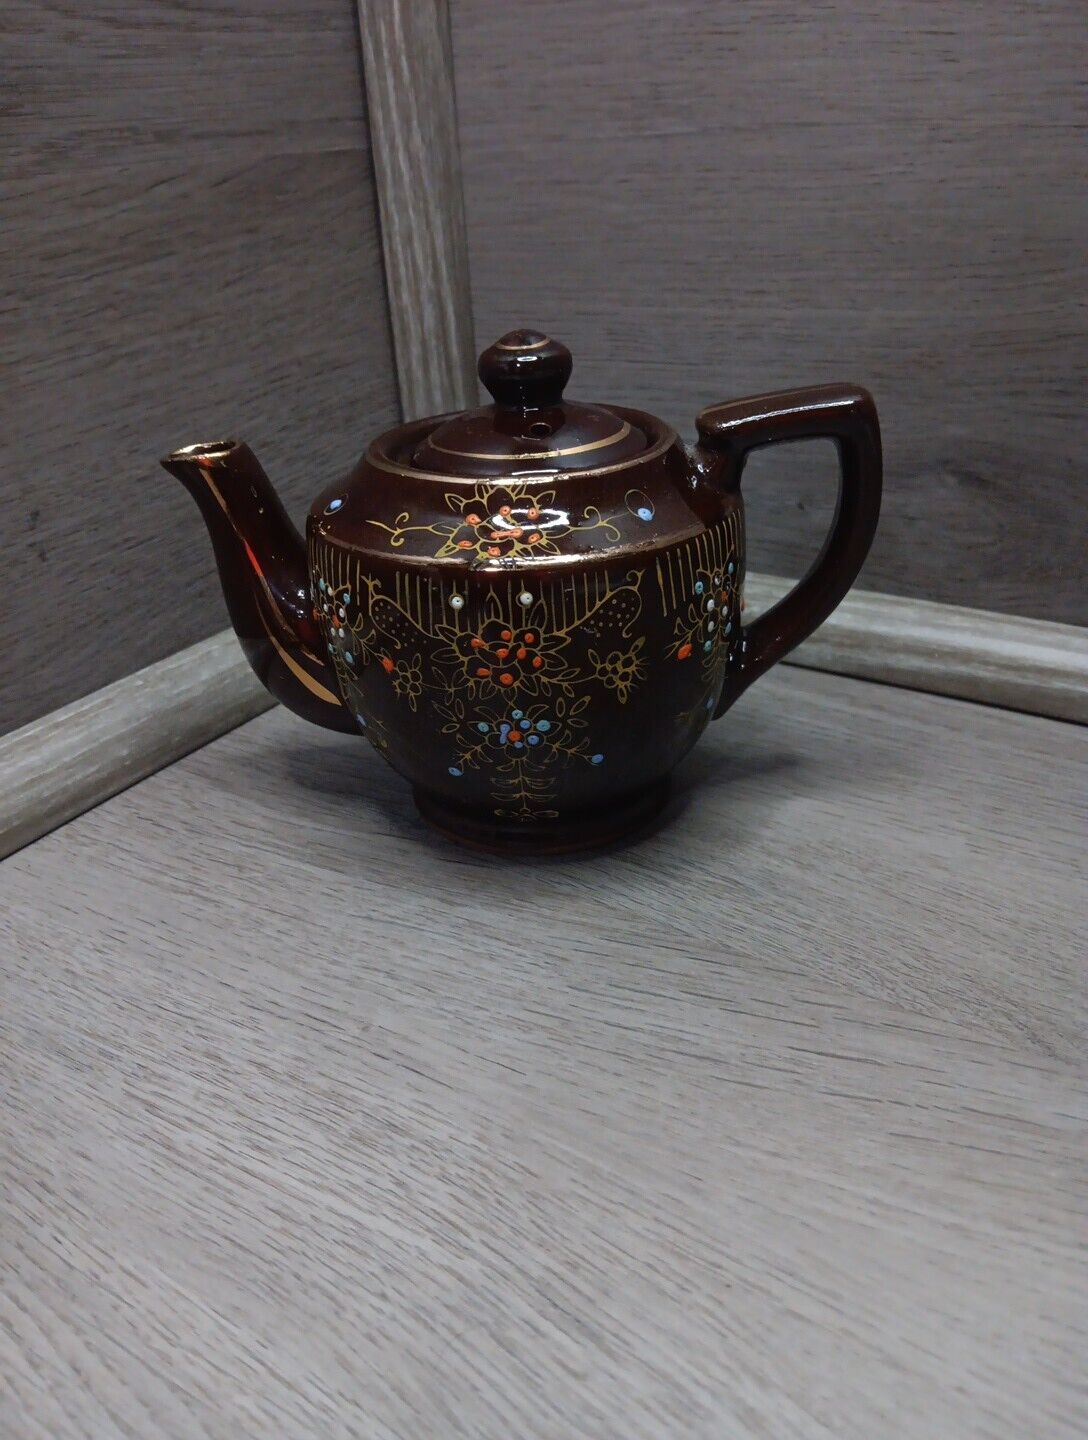 Vintage Moriage Teapot Handpainted Japanese Redware Pottery